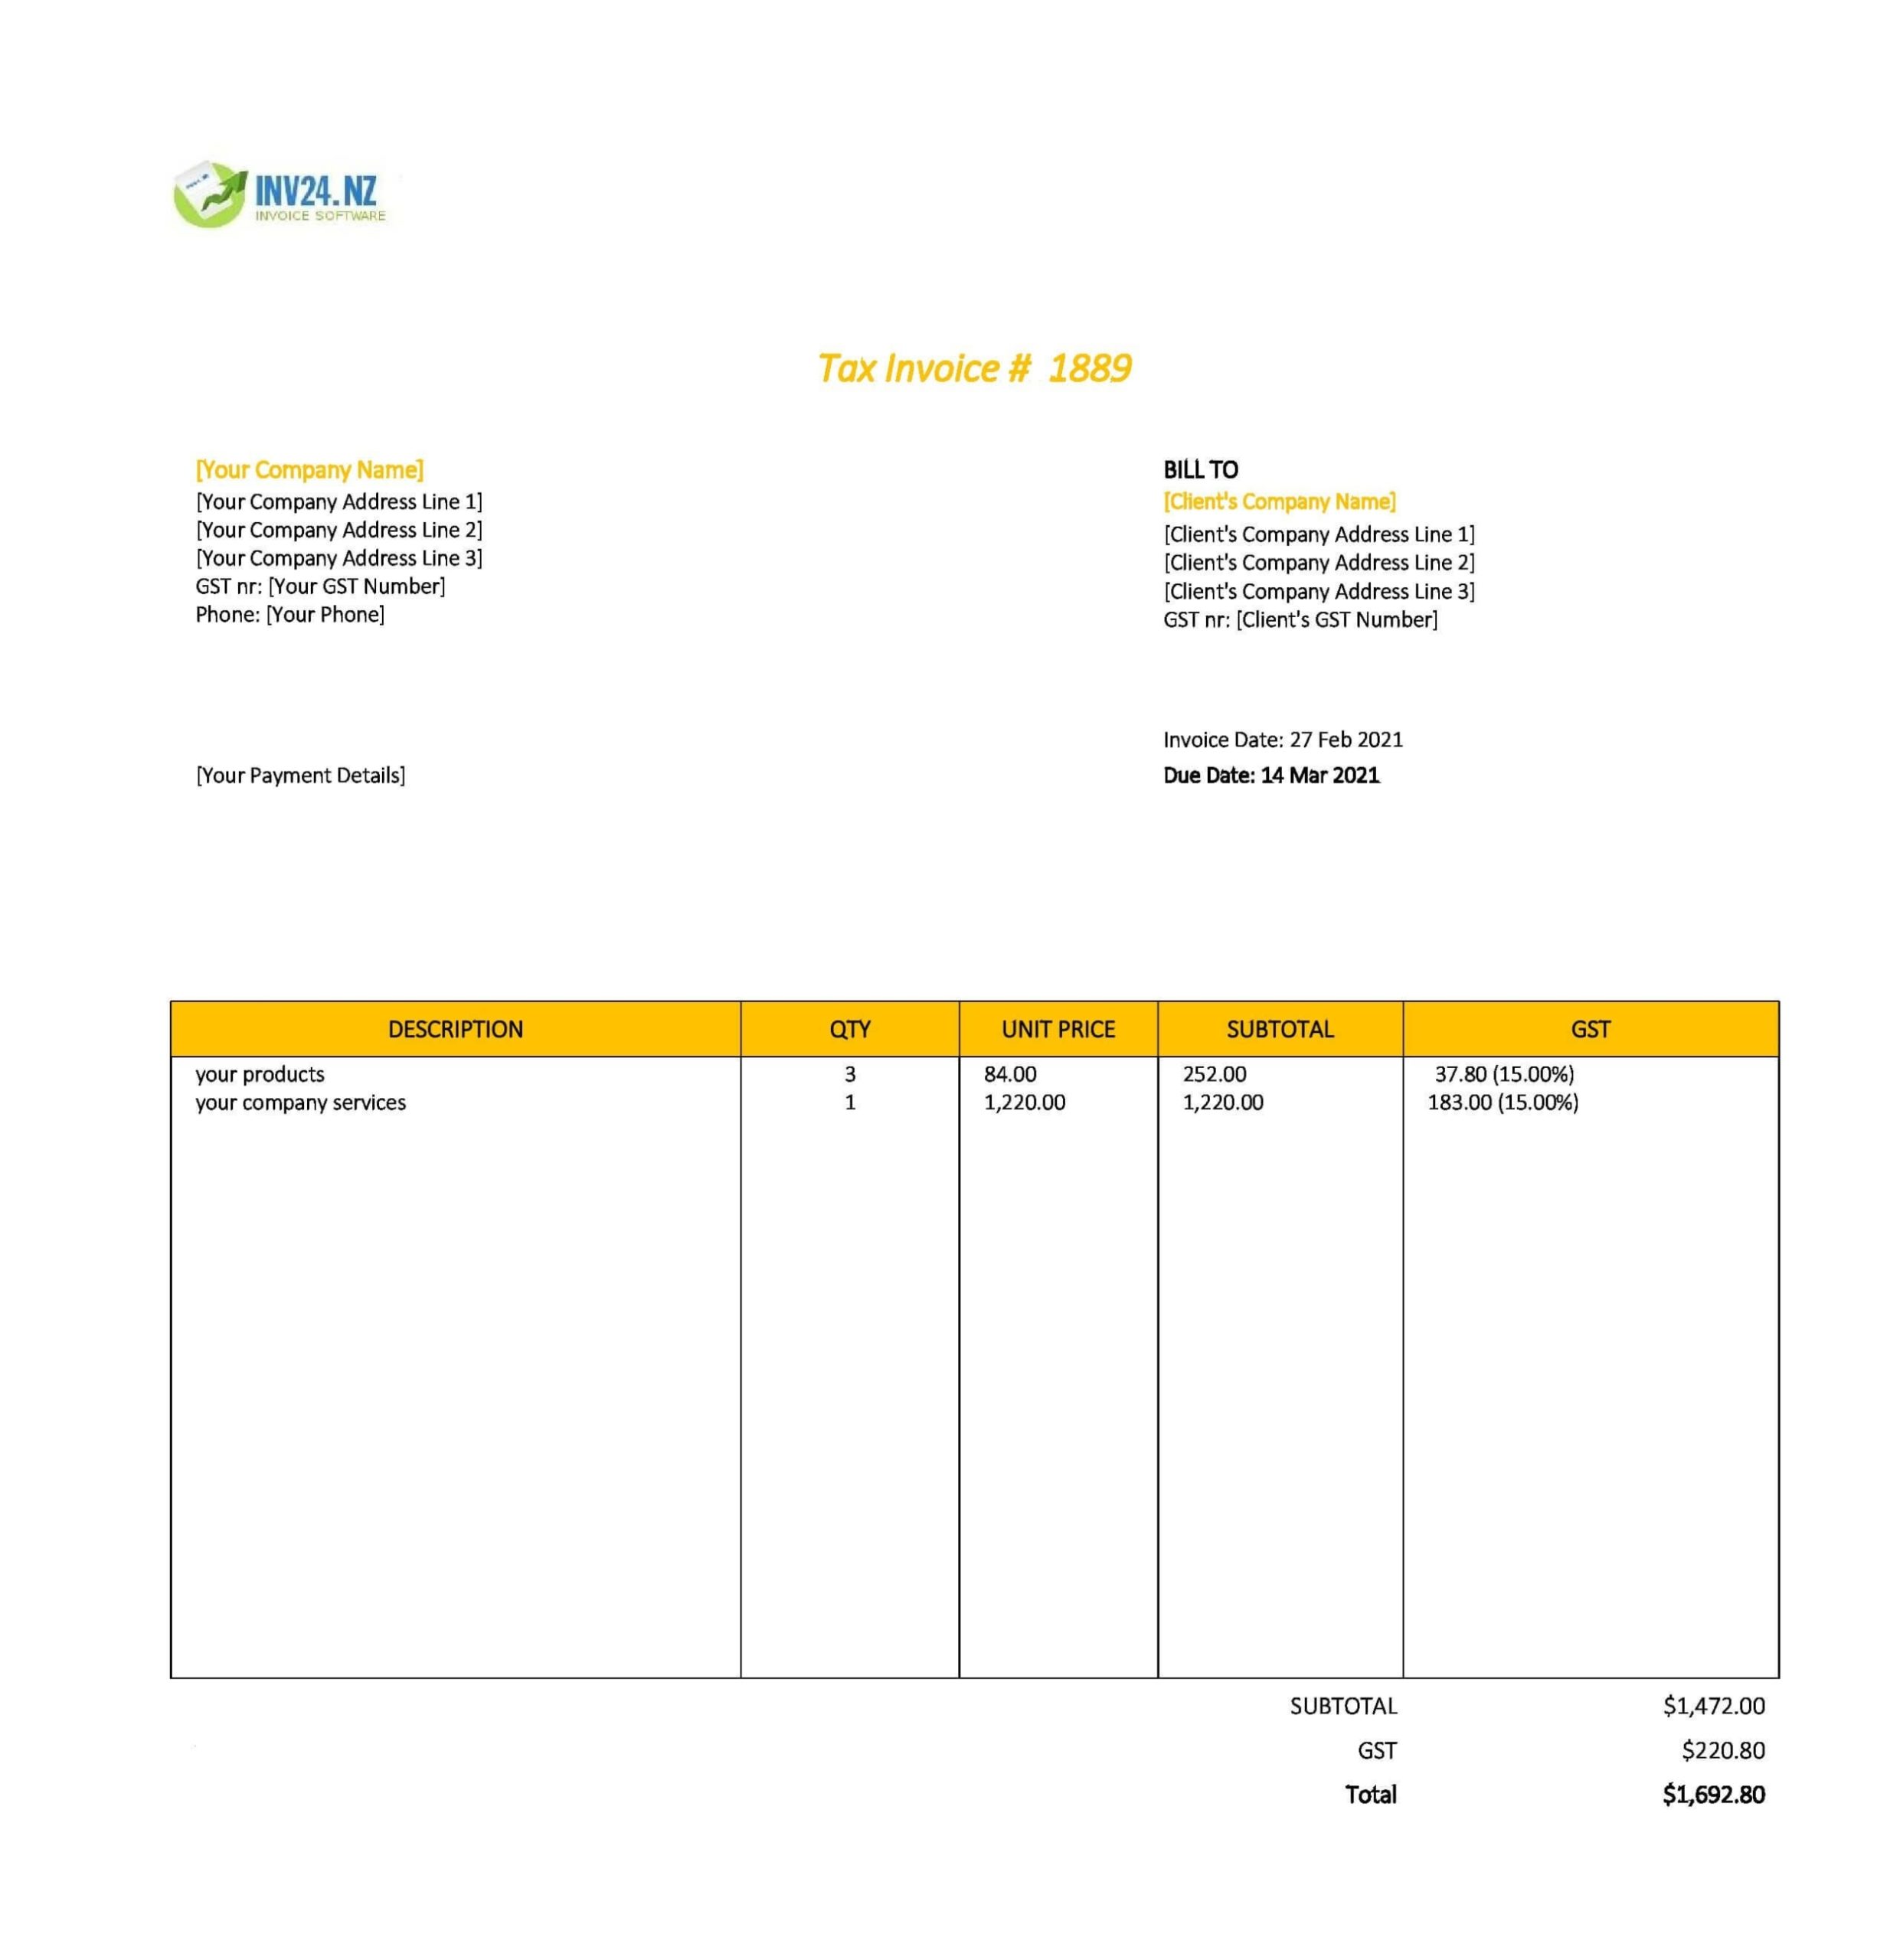 1 New Zealand Invoice Template Free Download - Invoice Template Nz Invoice Example Intended For Invoice Template New Zealand